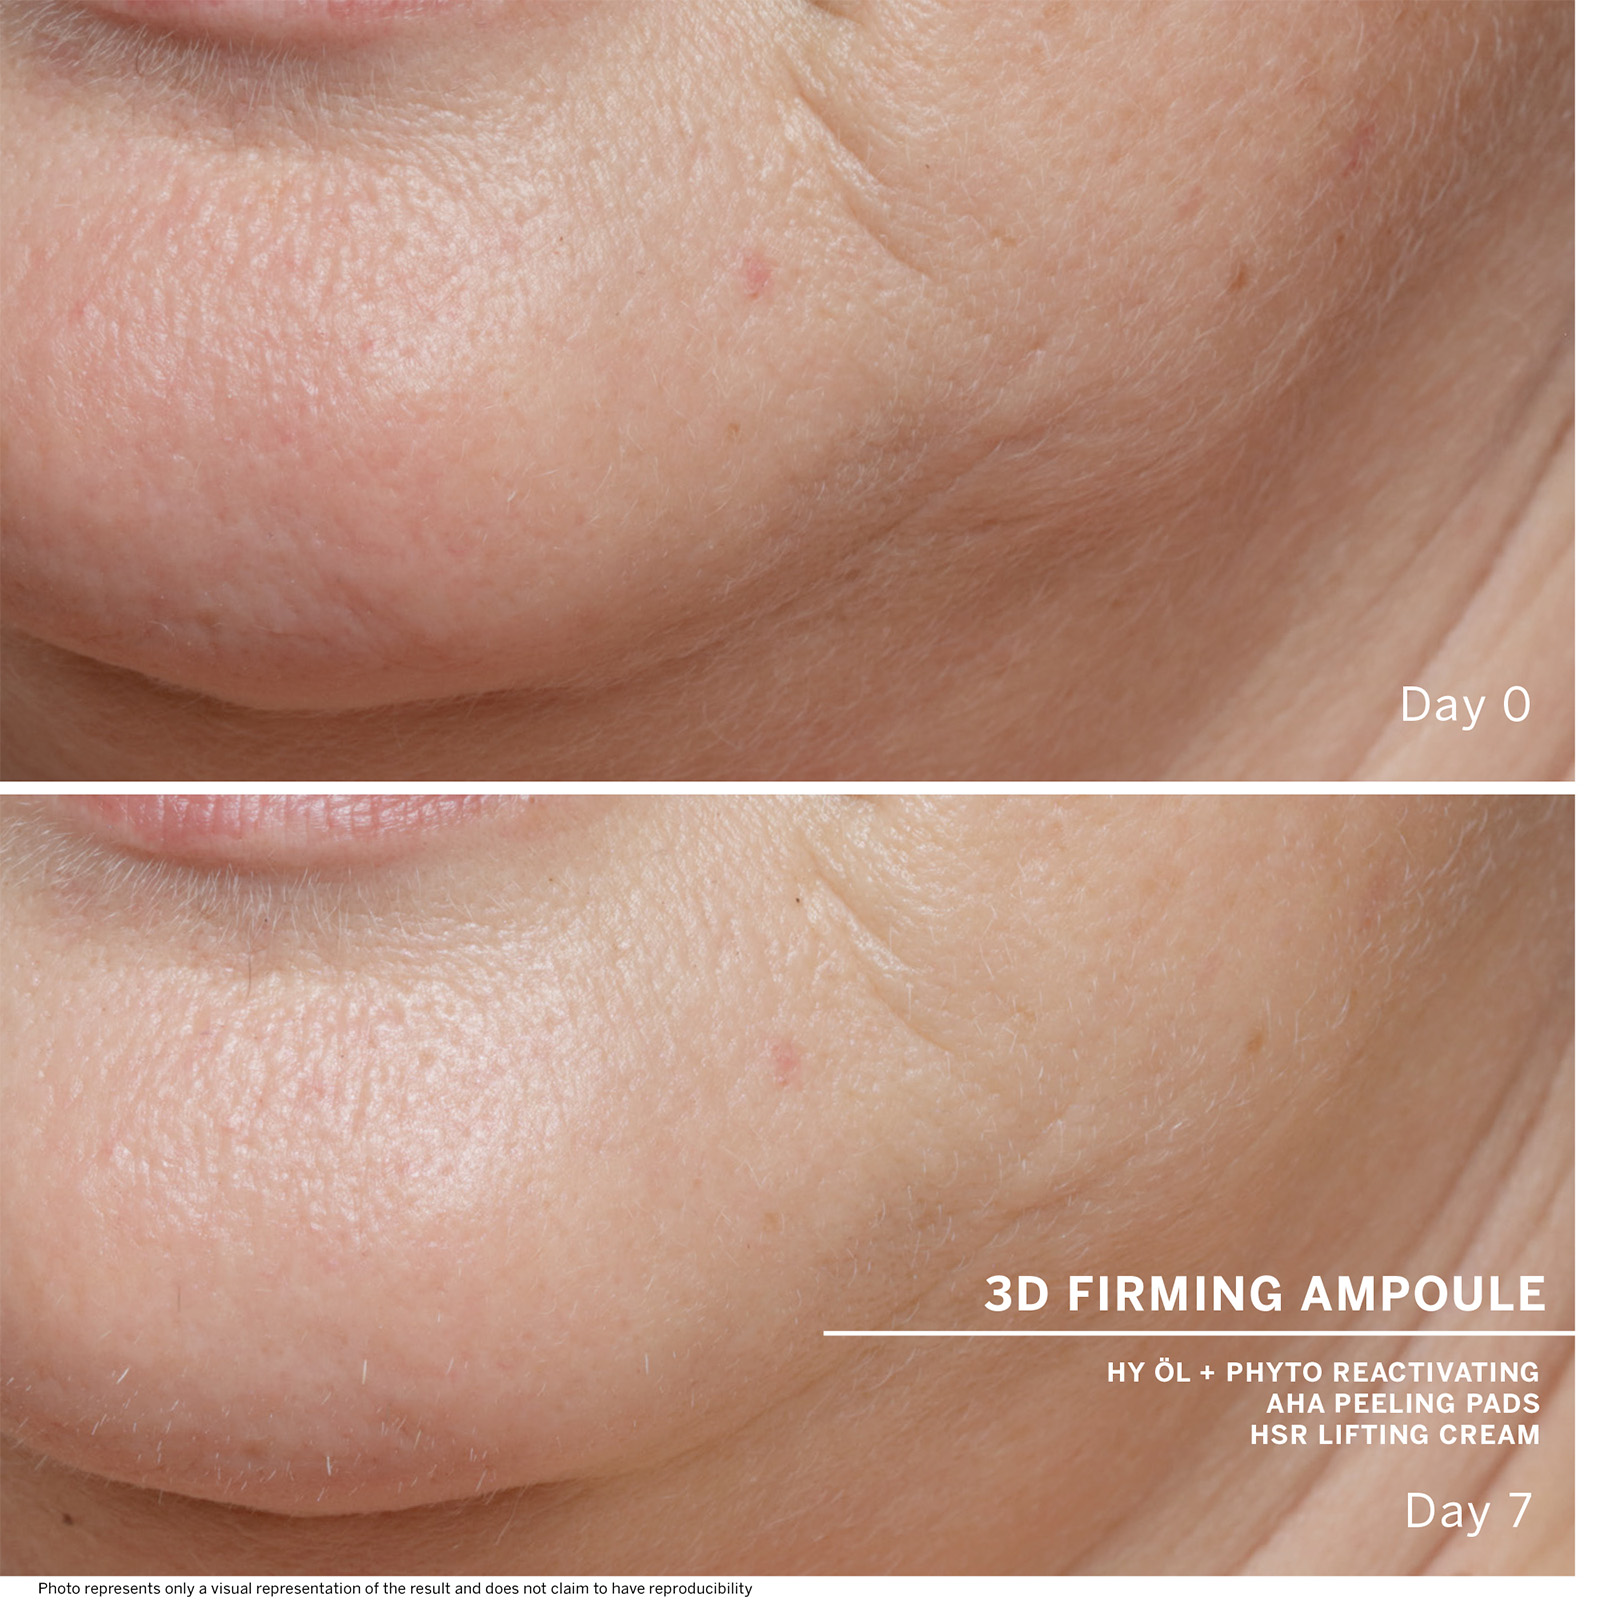 Day 0 3D Firming Ampoule Hy Öl + Phyto Reactivating Aha Peeling Pads Hsr Lifting Cream (Description: Skin before use) Day 7 (Description: skin appears visibly firmer) Photo Represents Only A Visual Representation Of The Result And Does Not Claim To Have Reproducibility 